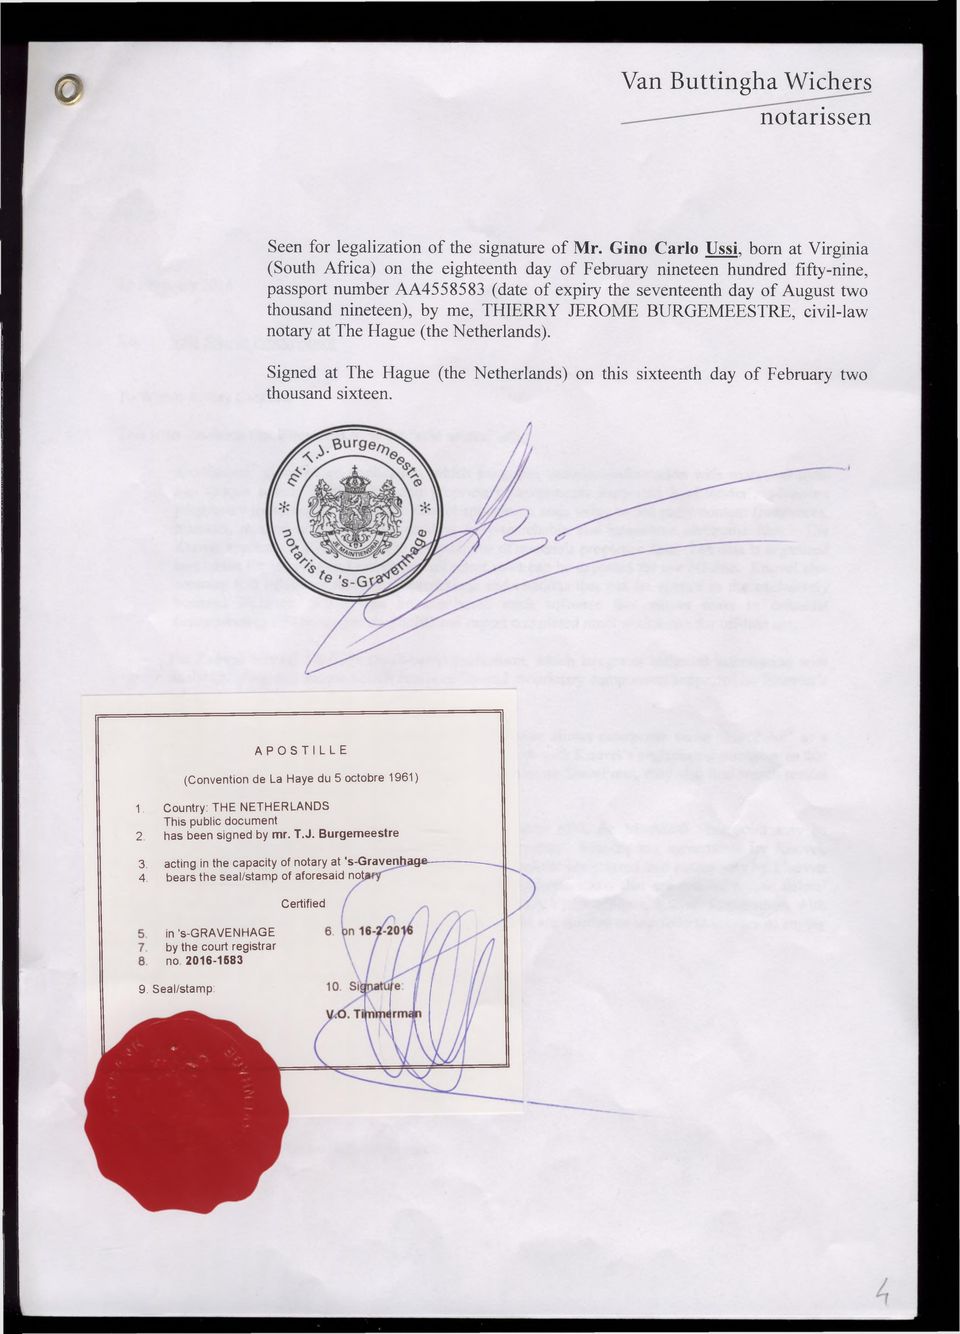 nineteen), by me, THIERRY JEROME BURGEMEESTRE, civil-law notary at The Hague (the Netherlands). Signed at The Hague (the Netherlands) on this sixteenth day o f February two thousand sixteen.